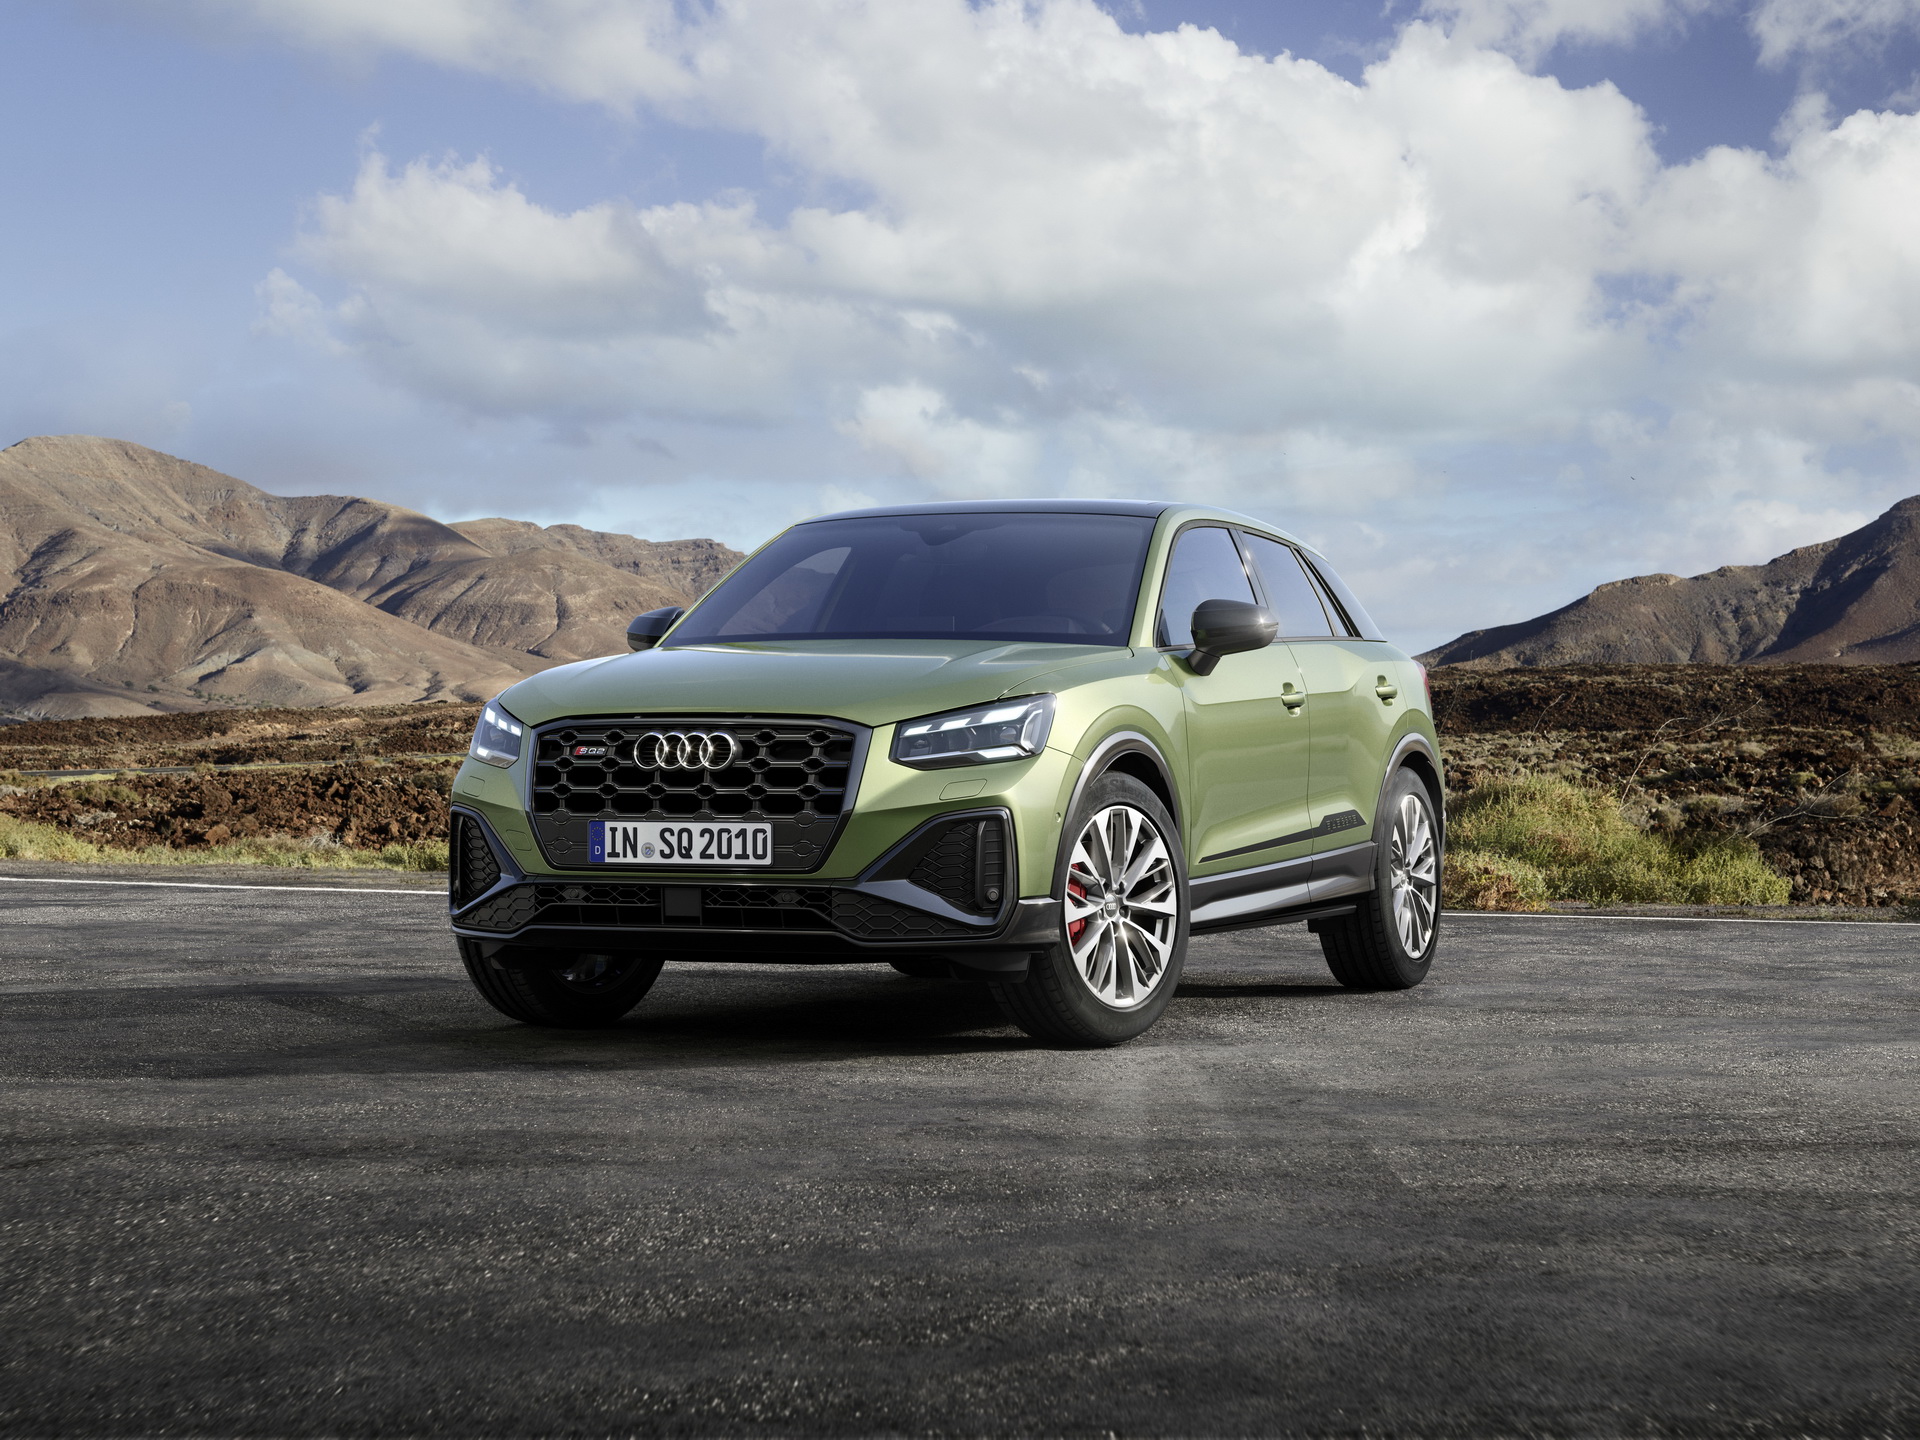 21 Audi Sq2 Arrives With Sharper Styling And New Tech Carscoops